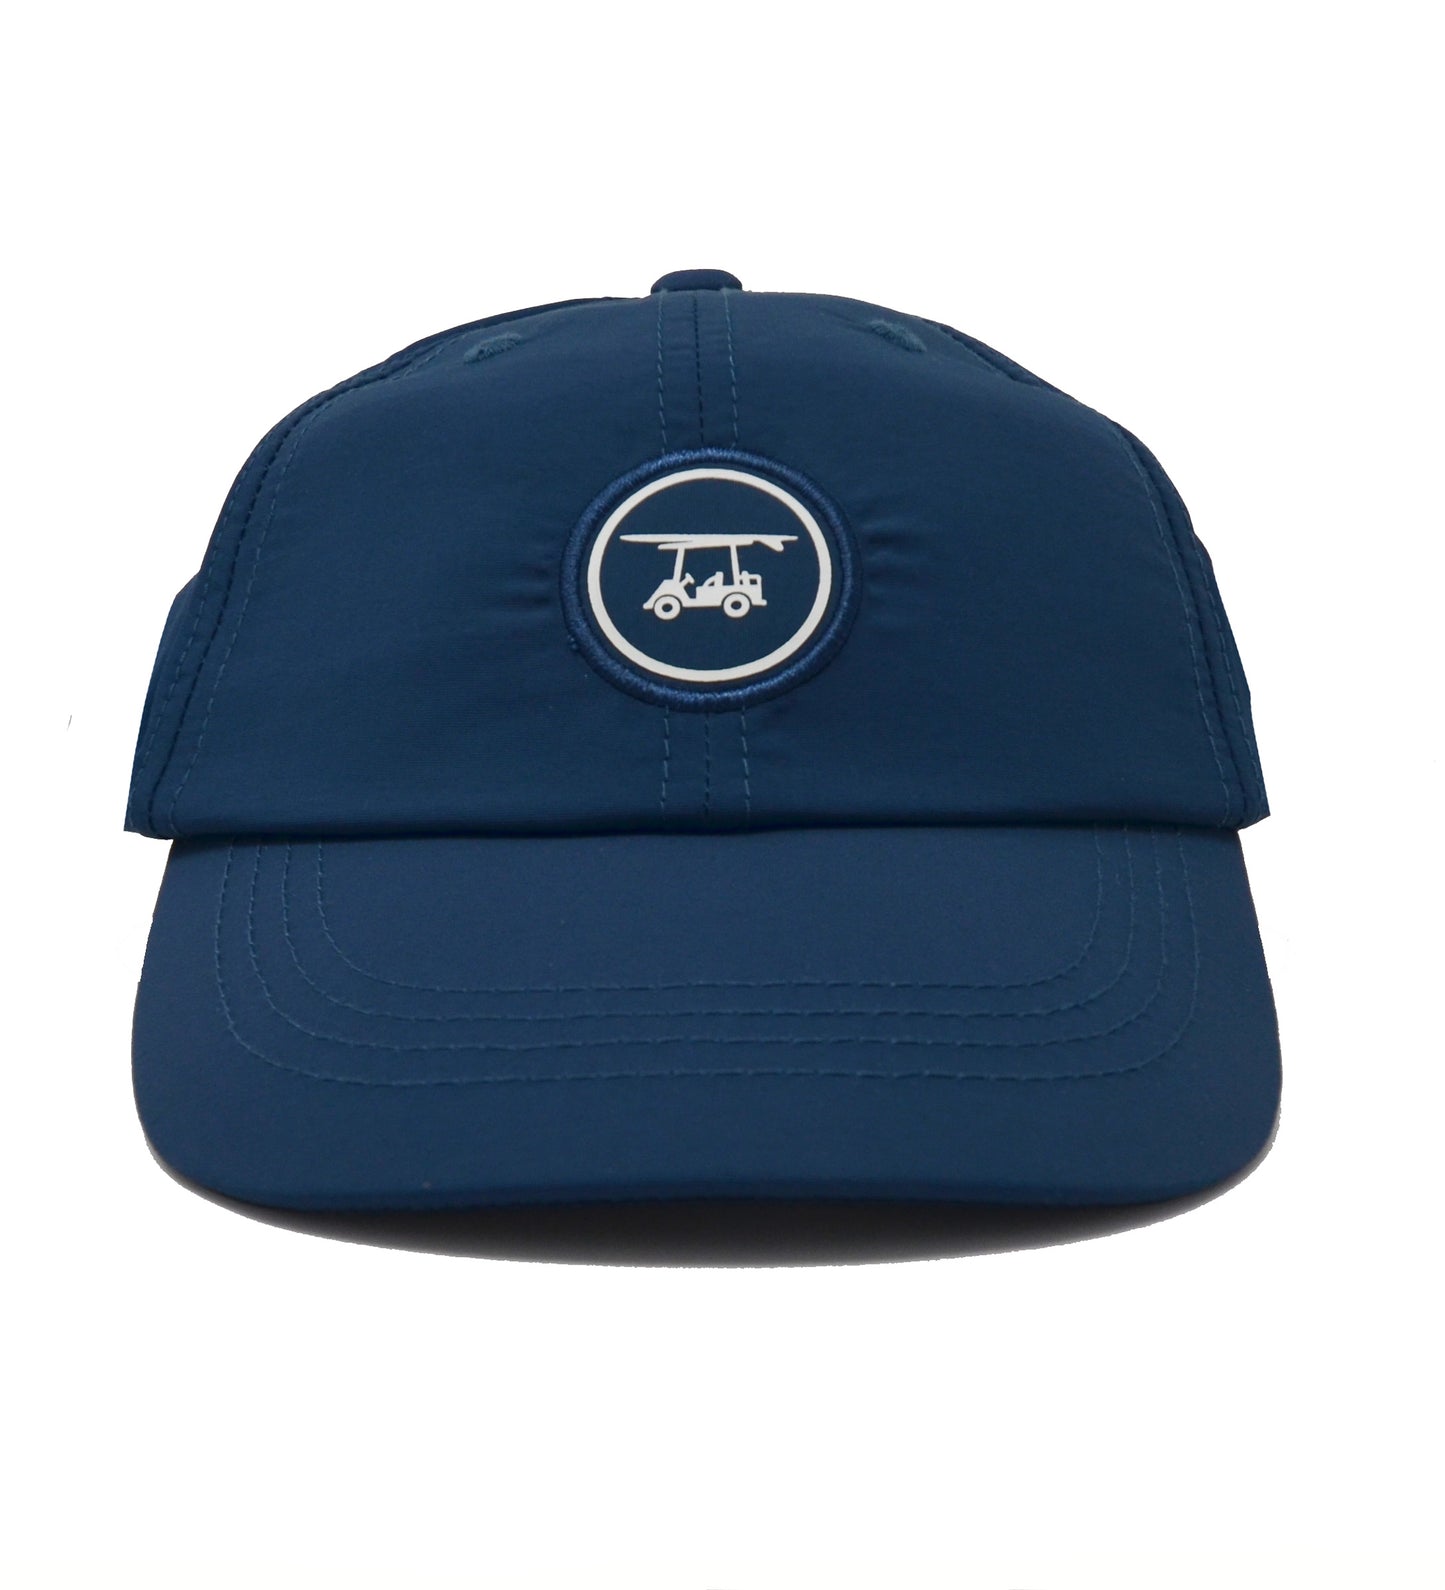 Youth Performance Hat - Navy